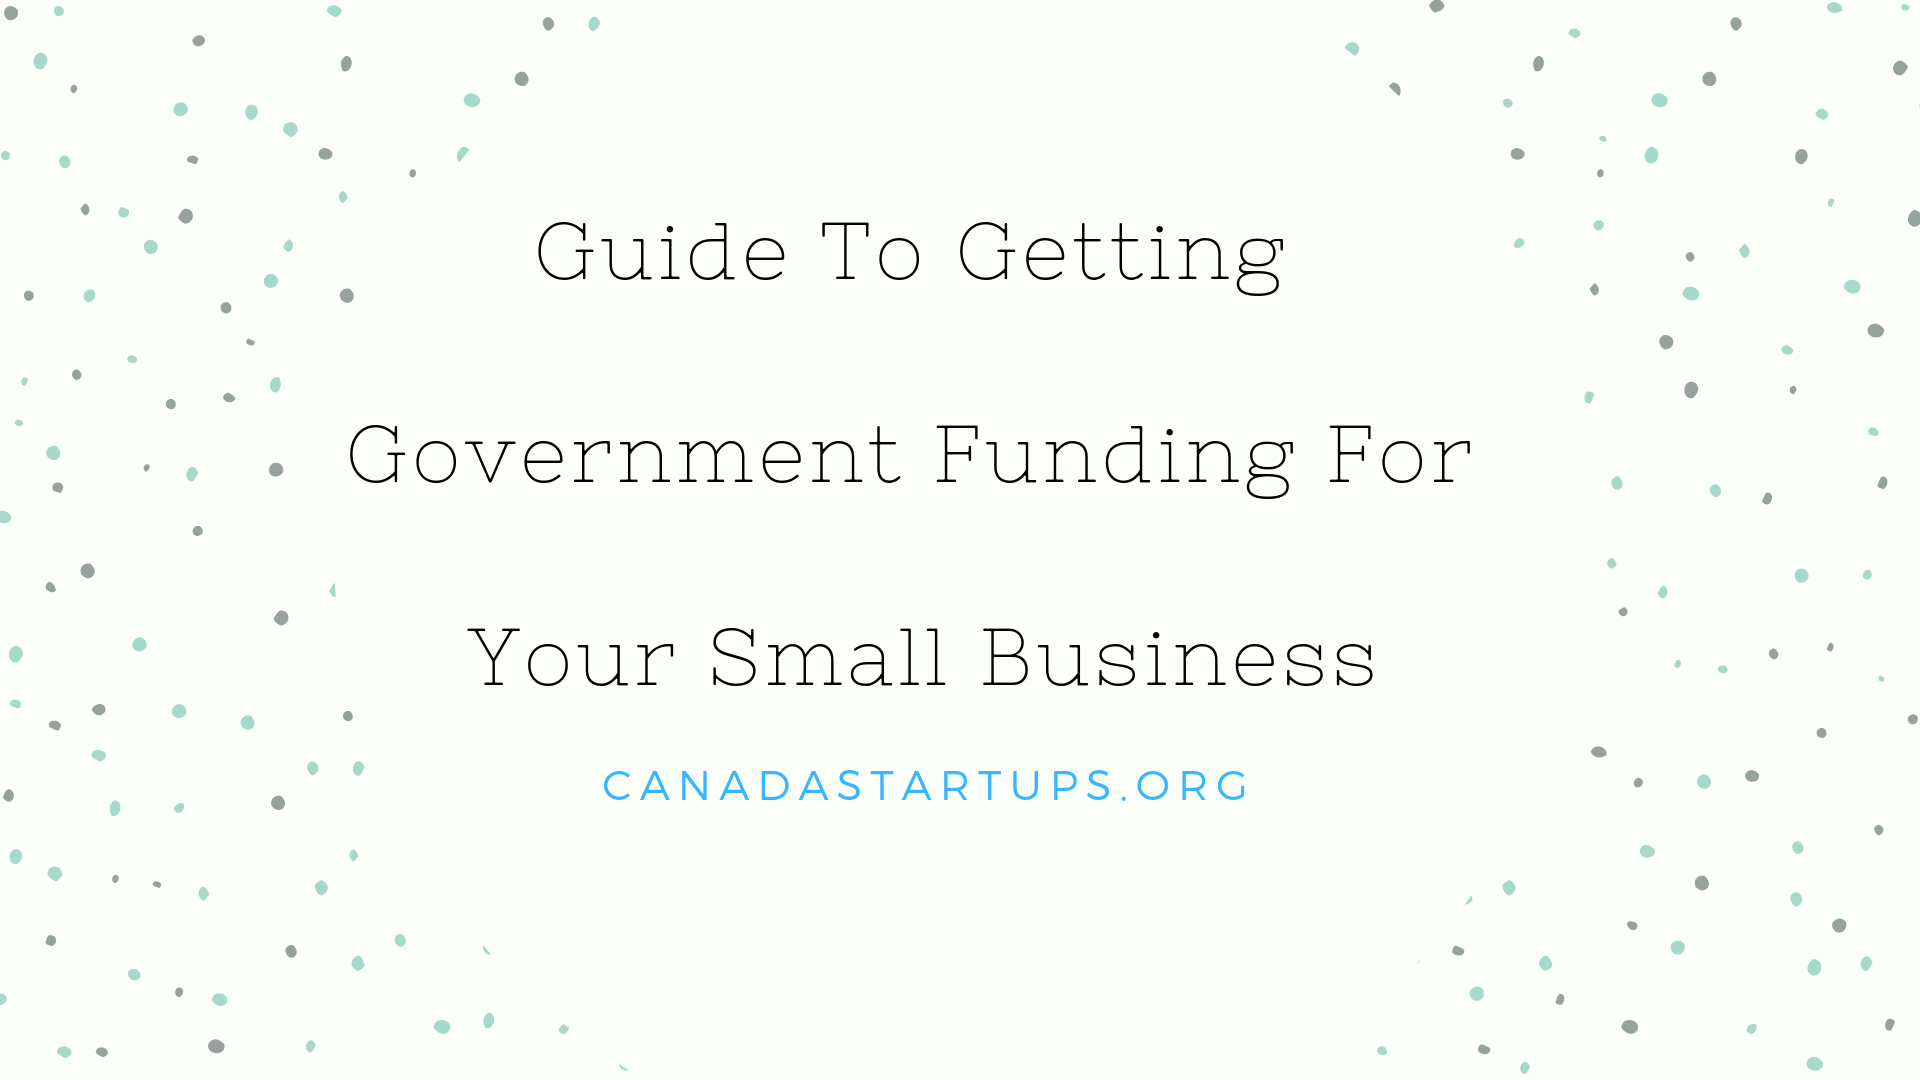 Guide To Getting Government Funding For Your Small Business